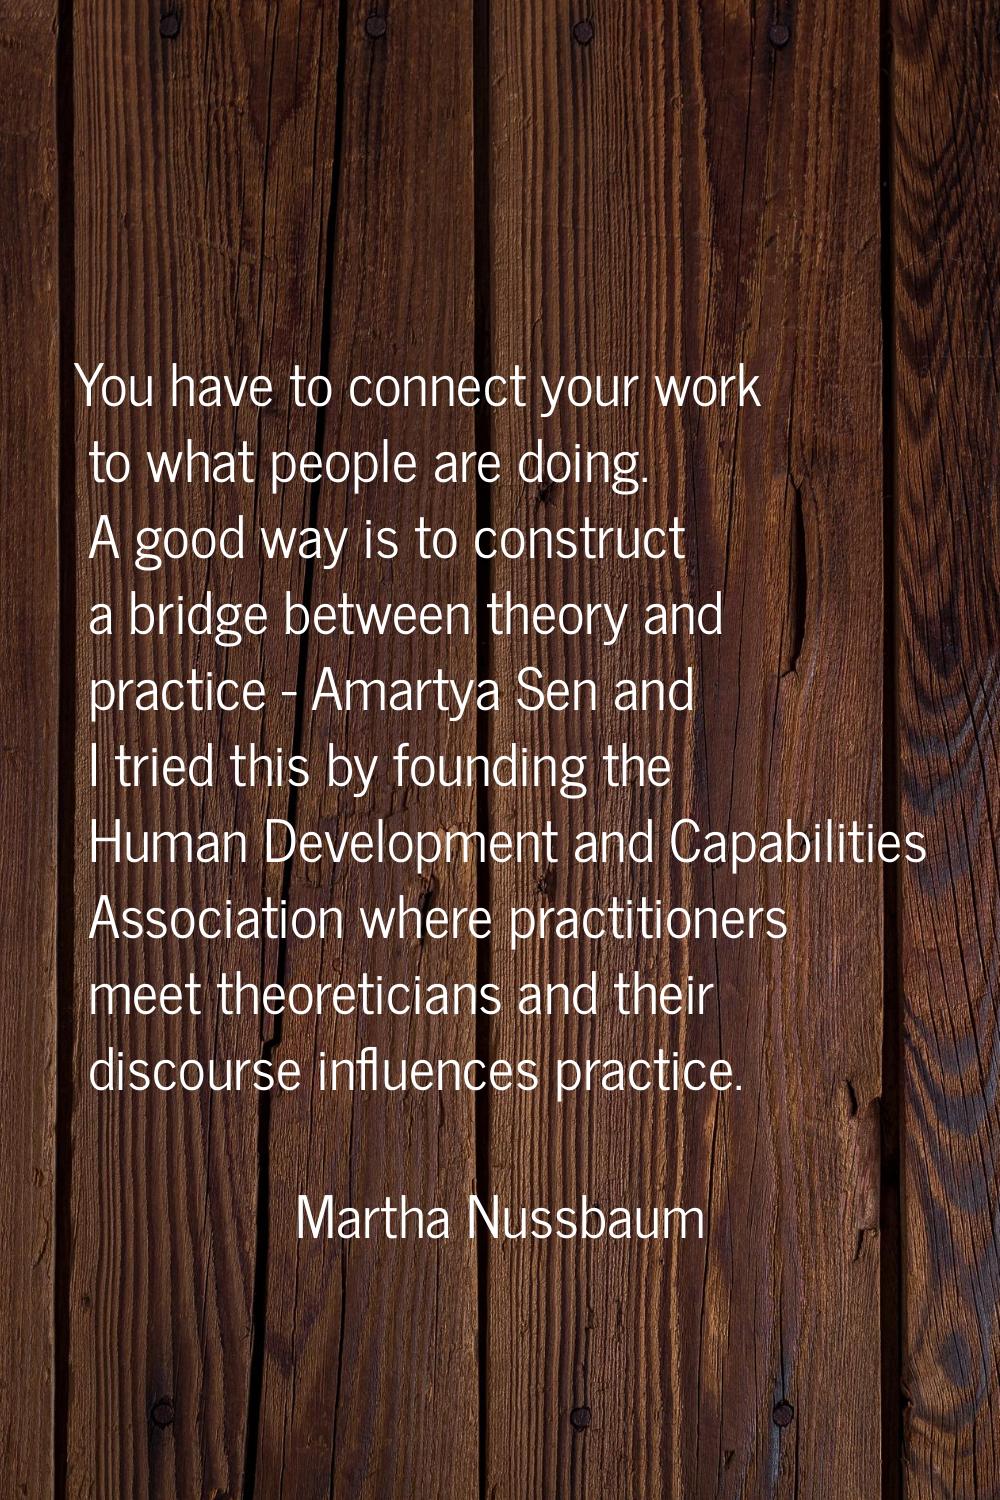 You have to connect your work to what people are doing. A good way is to construct a bridge between